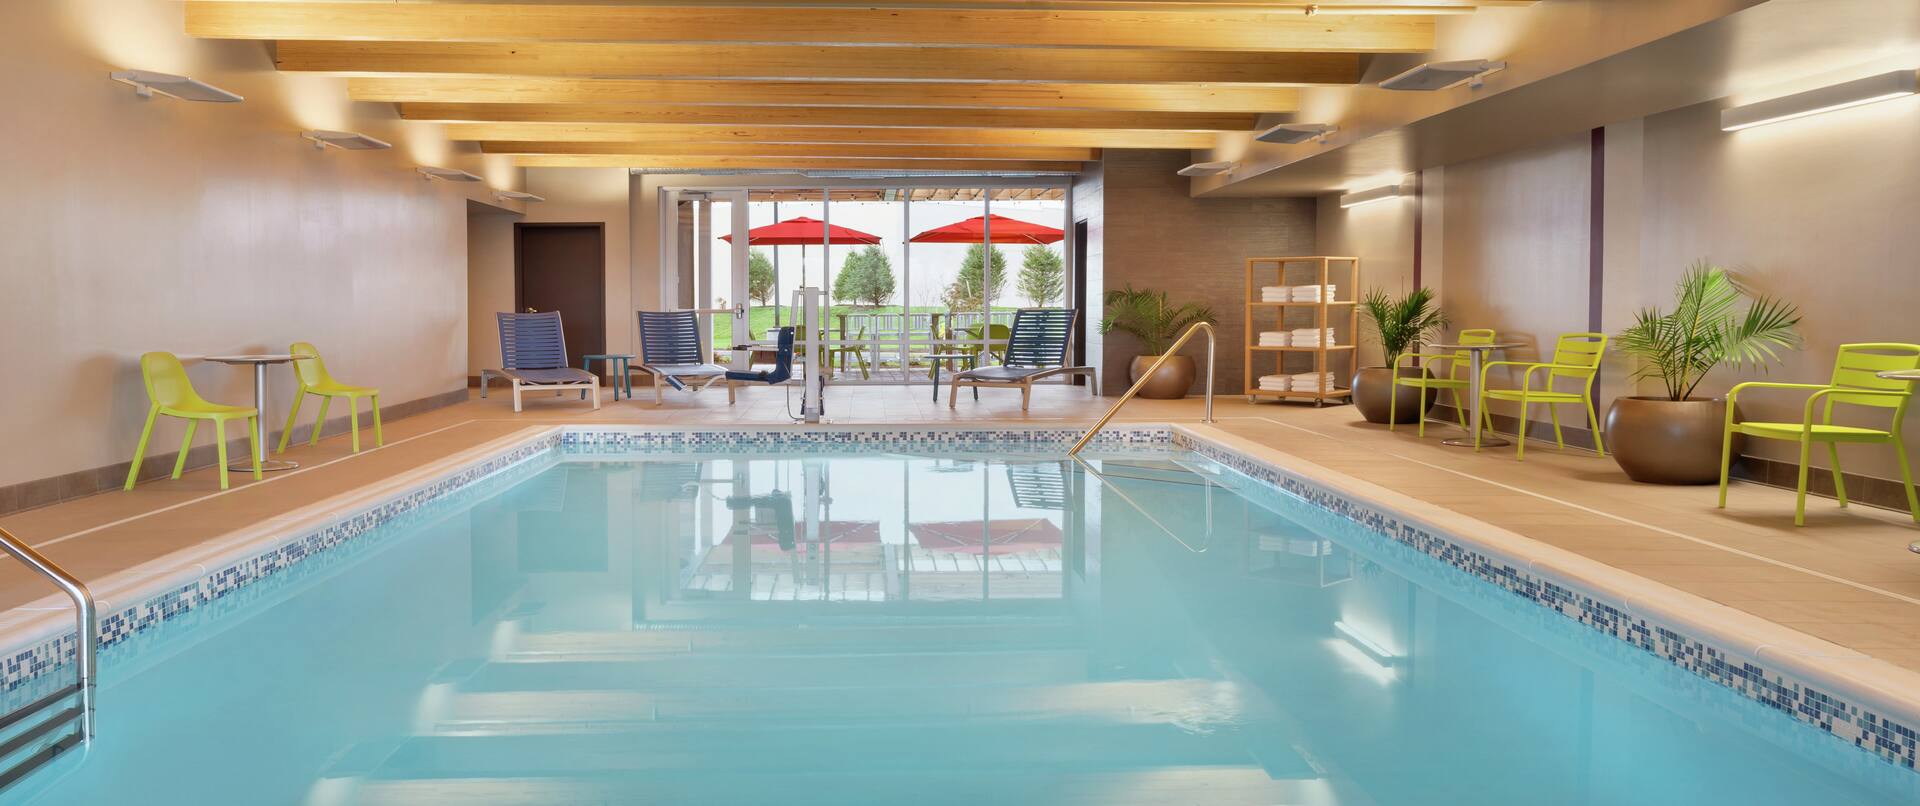 Beautiful indoor pool featuring comfortable seating, large windows, and cedar ceiling.